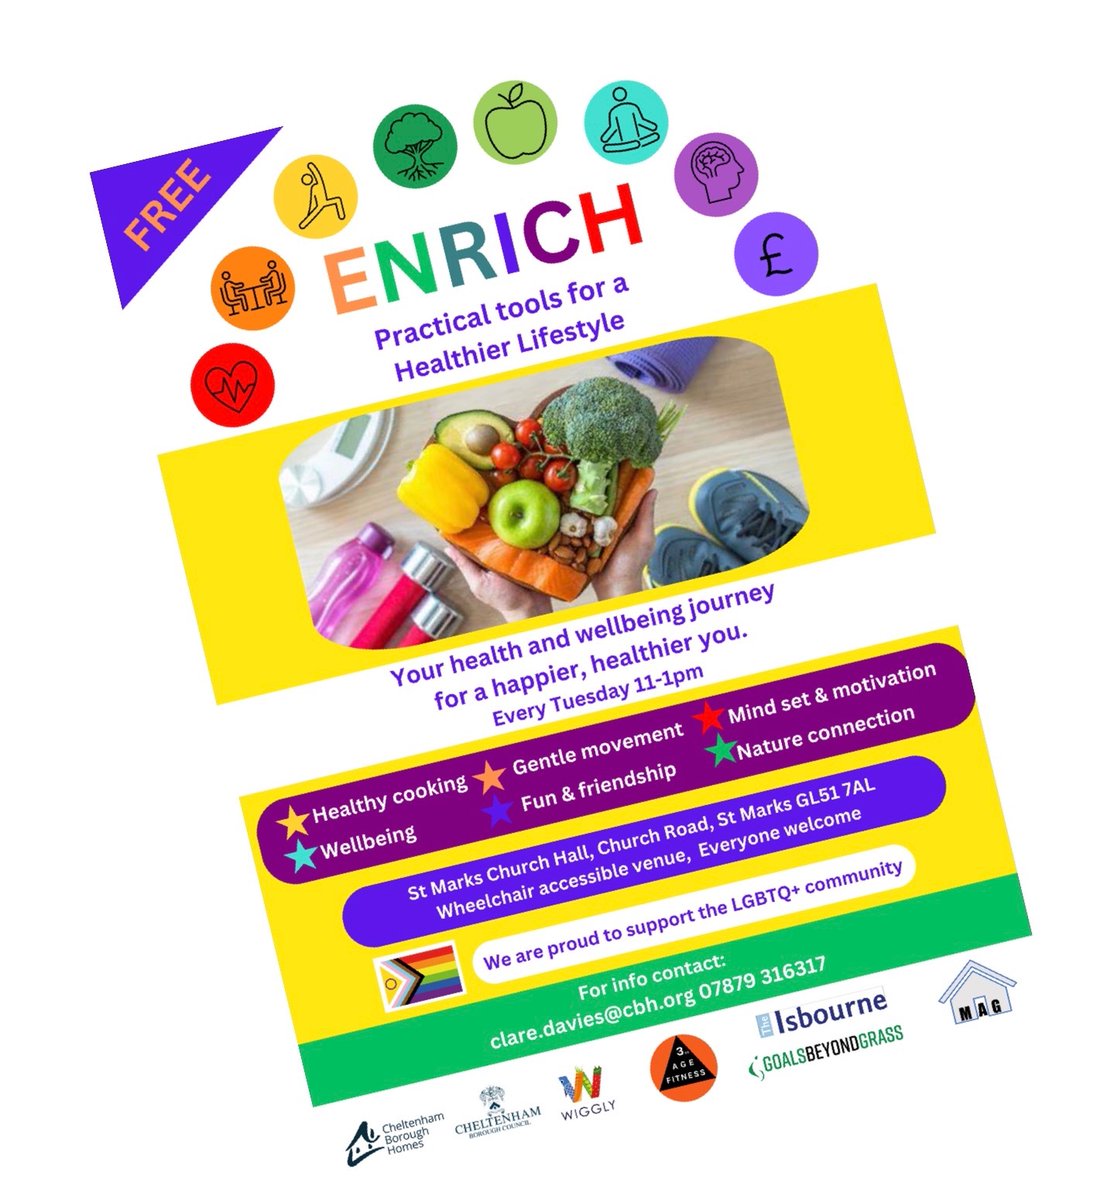 Enrich is a year long health and wellbeing project covering all aspects of health from healthy cooking, gentle exercise and nature connection. Diverse and definitely LGBT+ welcoming 🌈 #Cheltenham every Tuesday 11-1pm